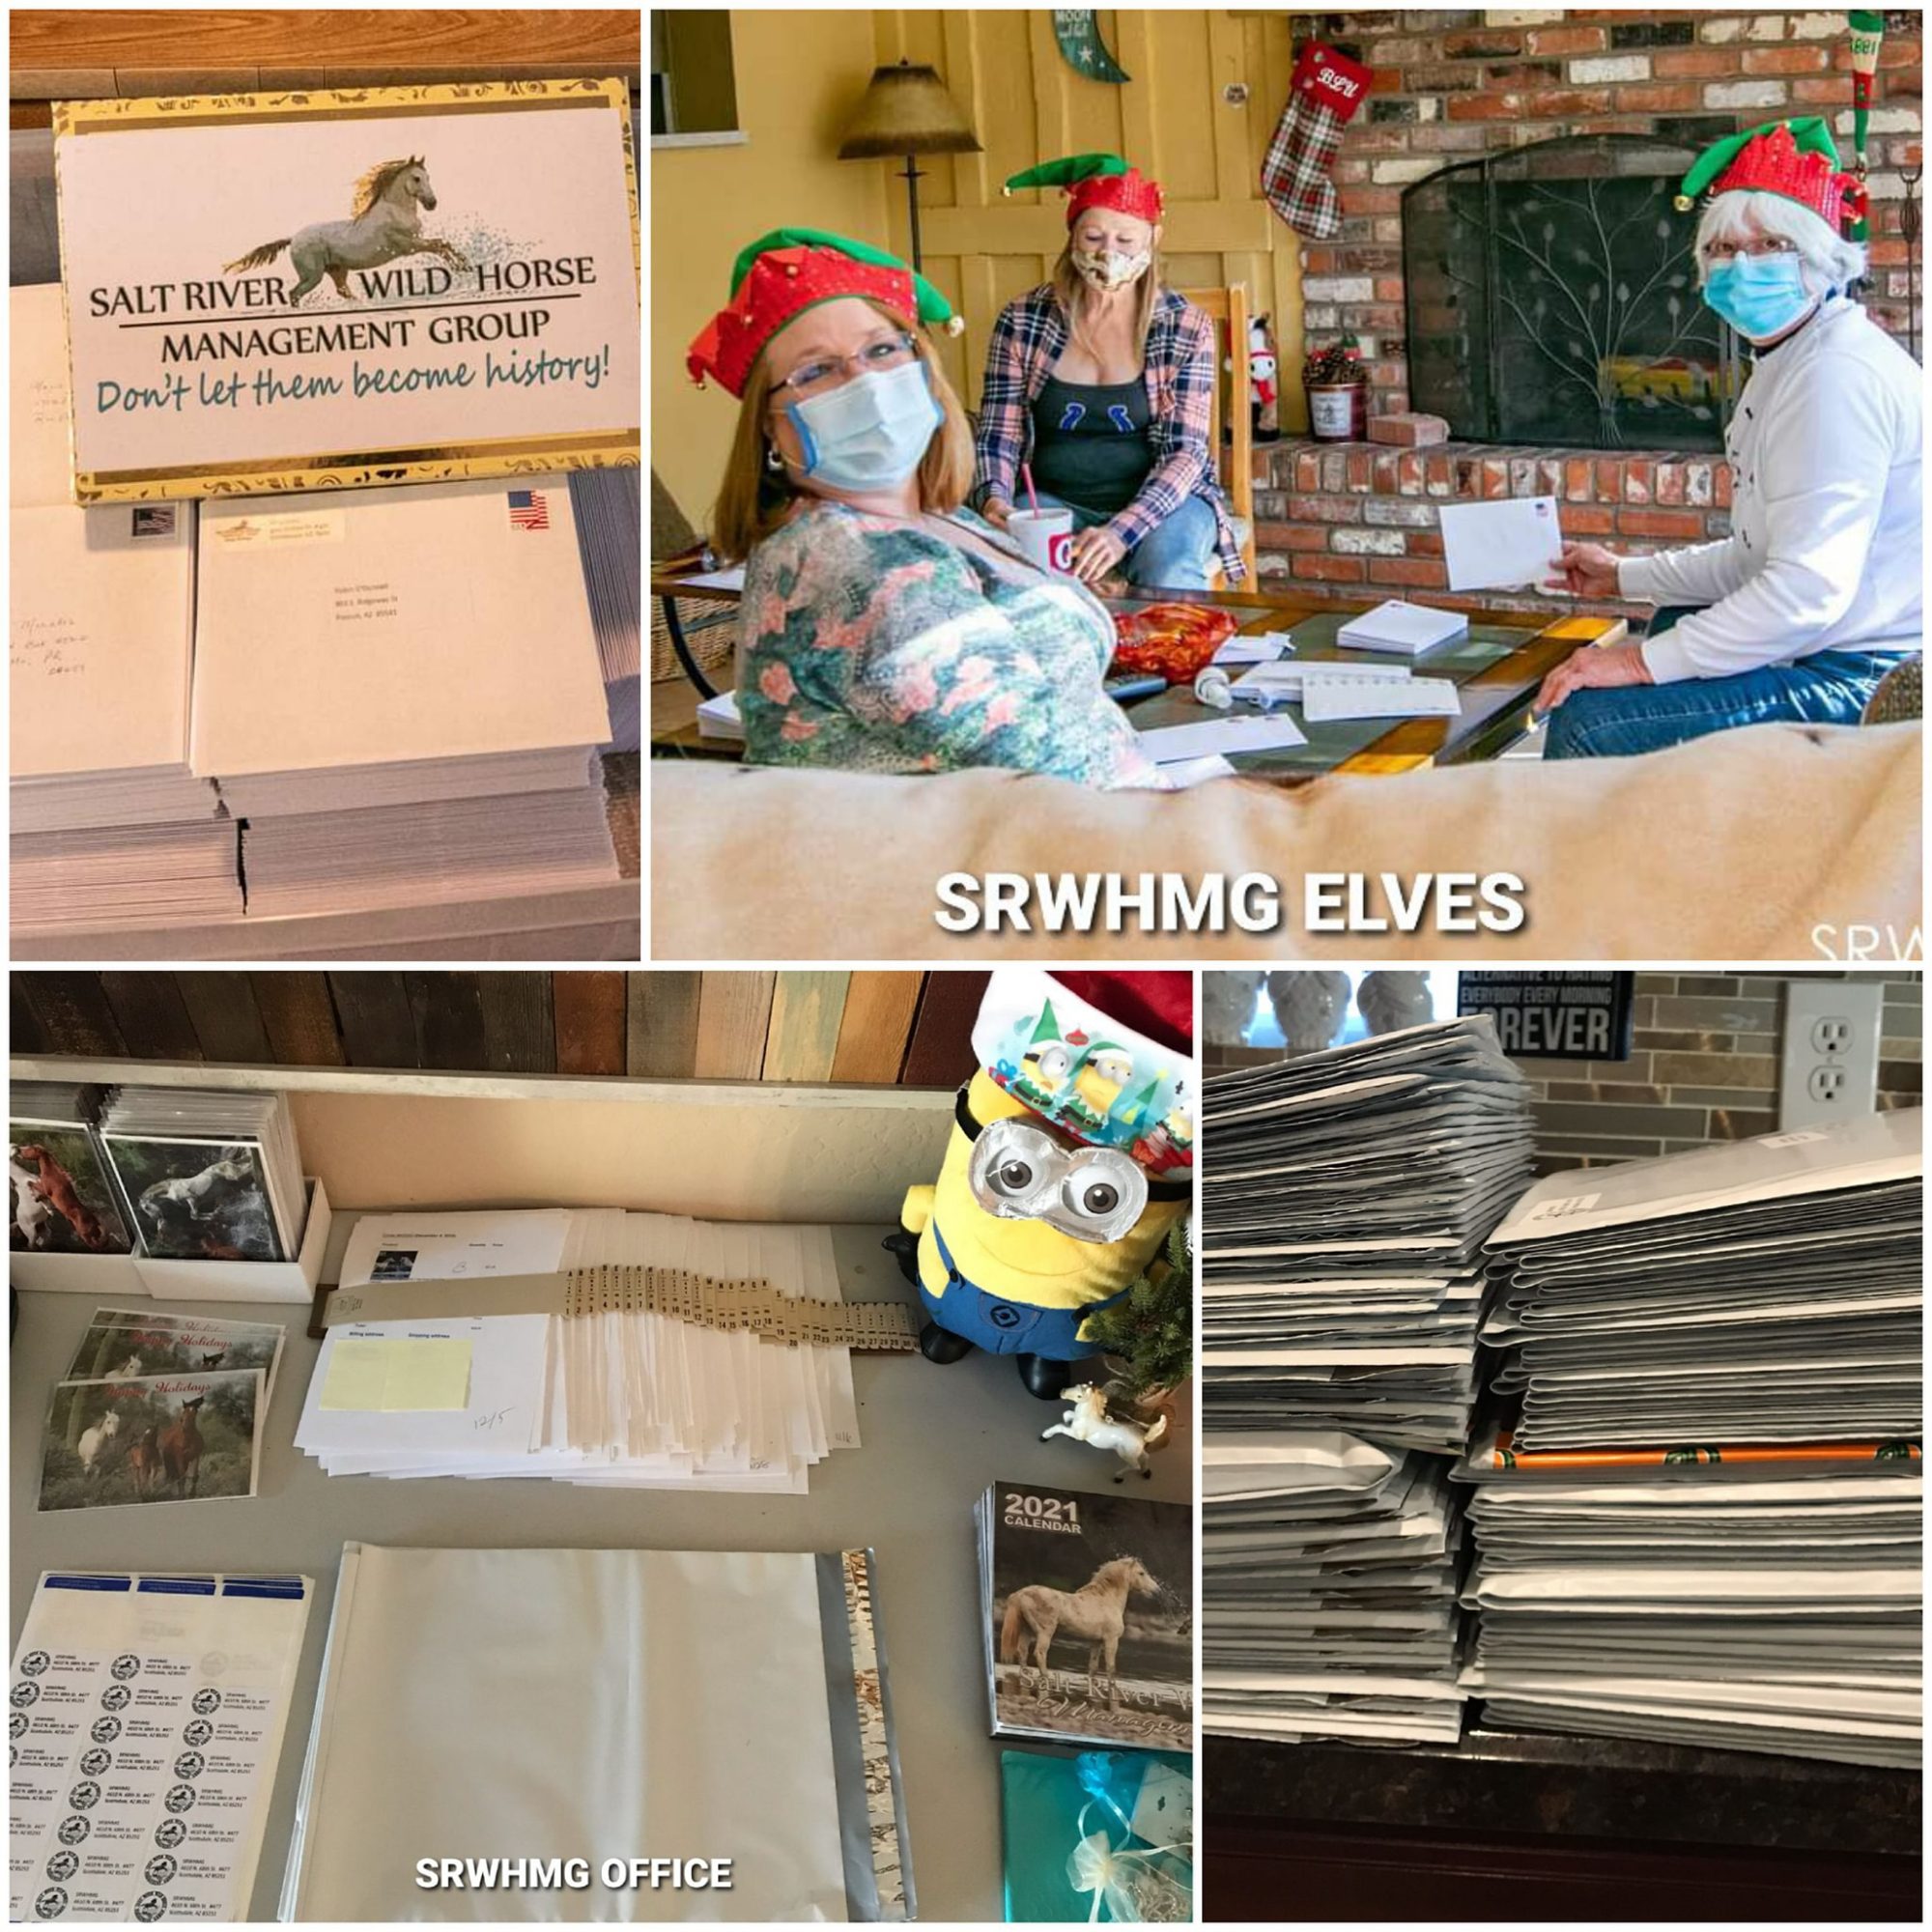 Our SRWHMG elves have been very busy!